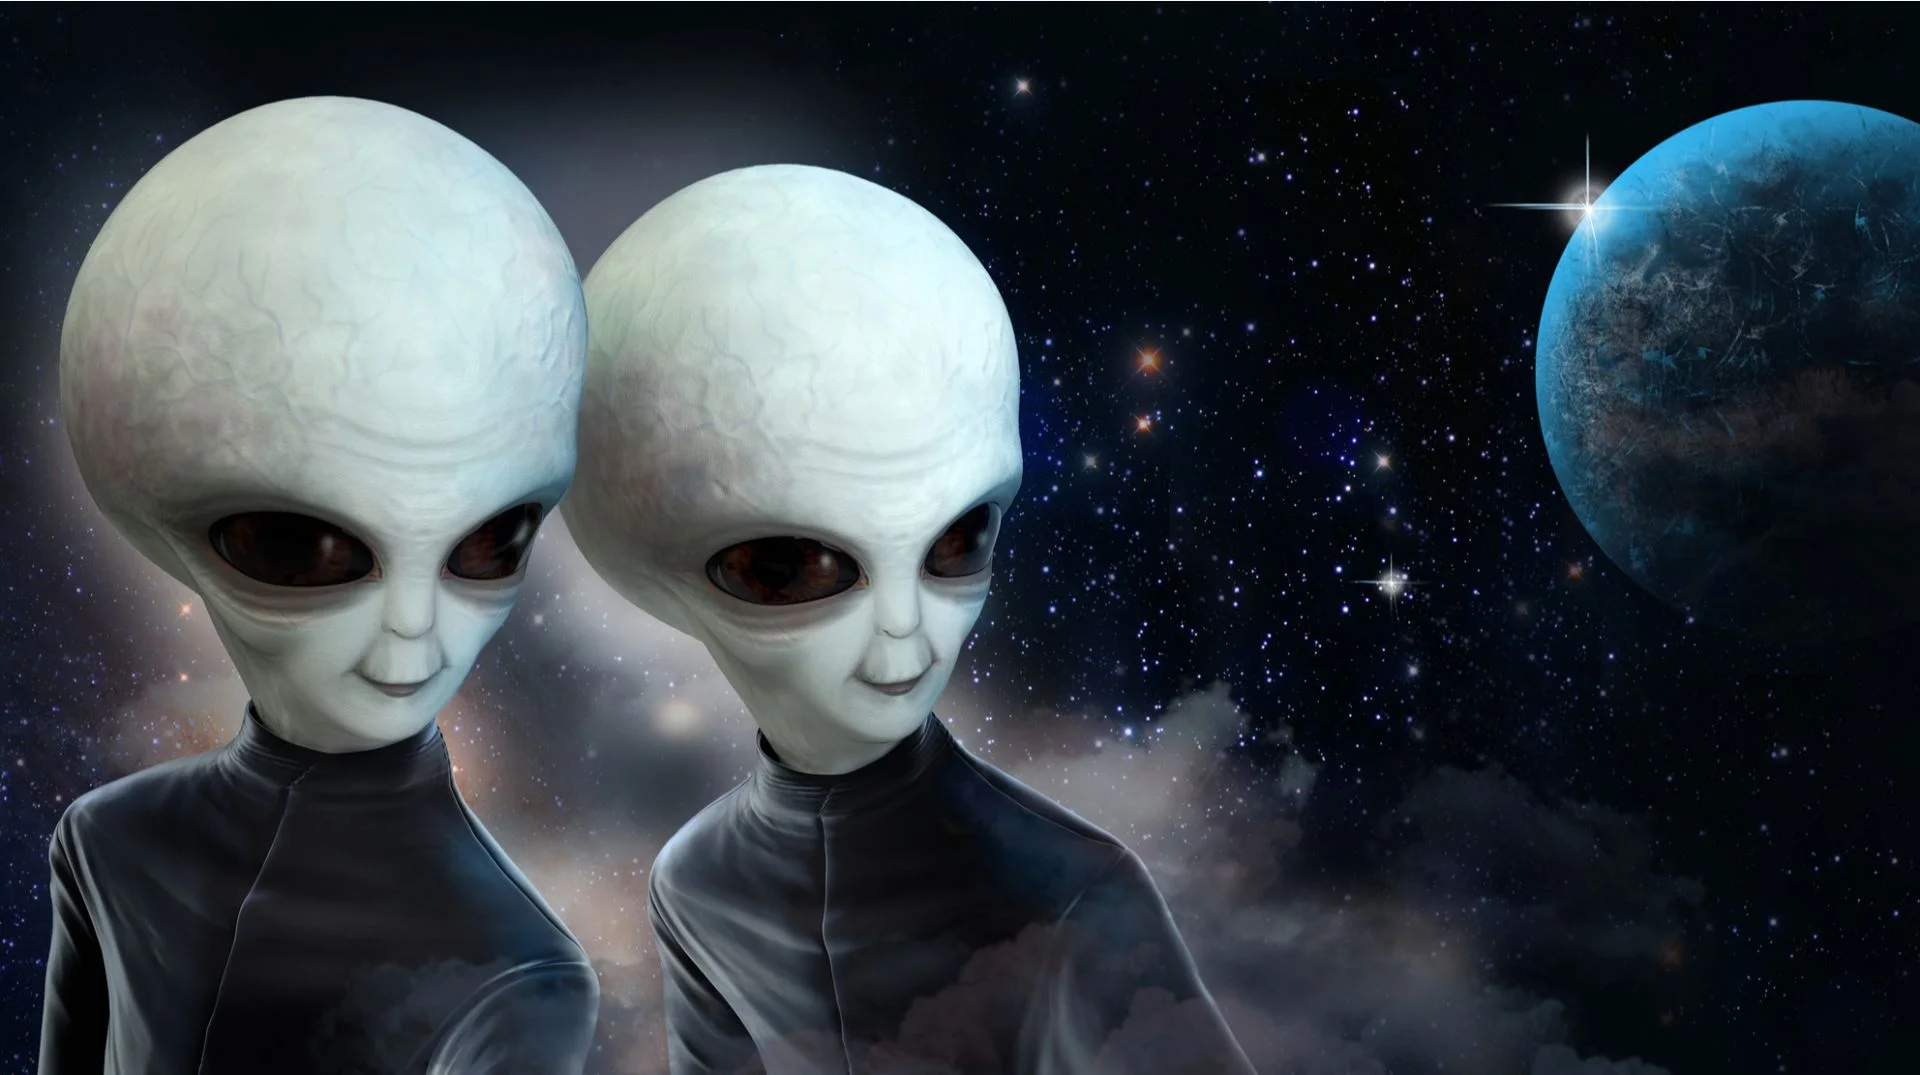 Are we mentally prepared for an encounter with aliens? image 1